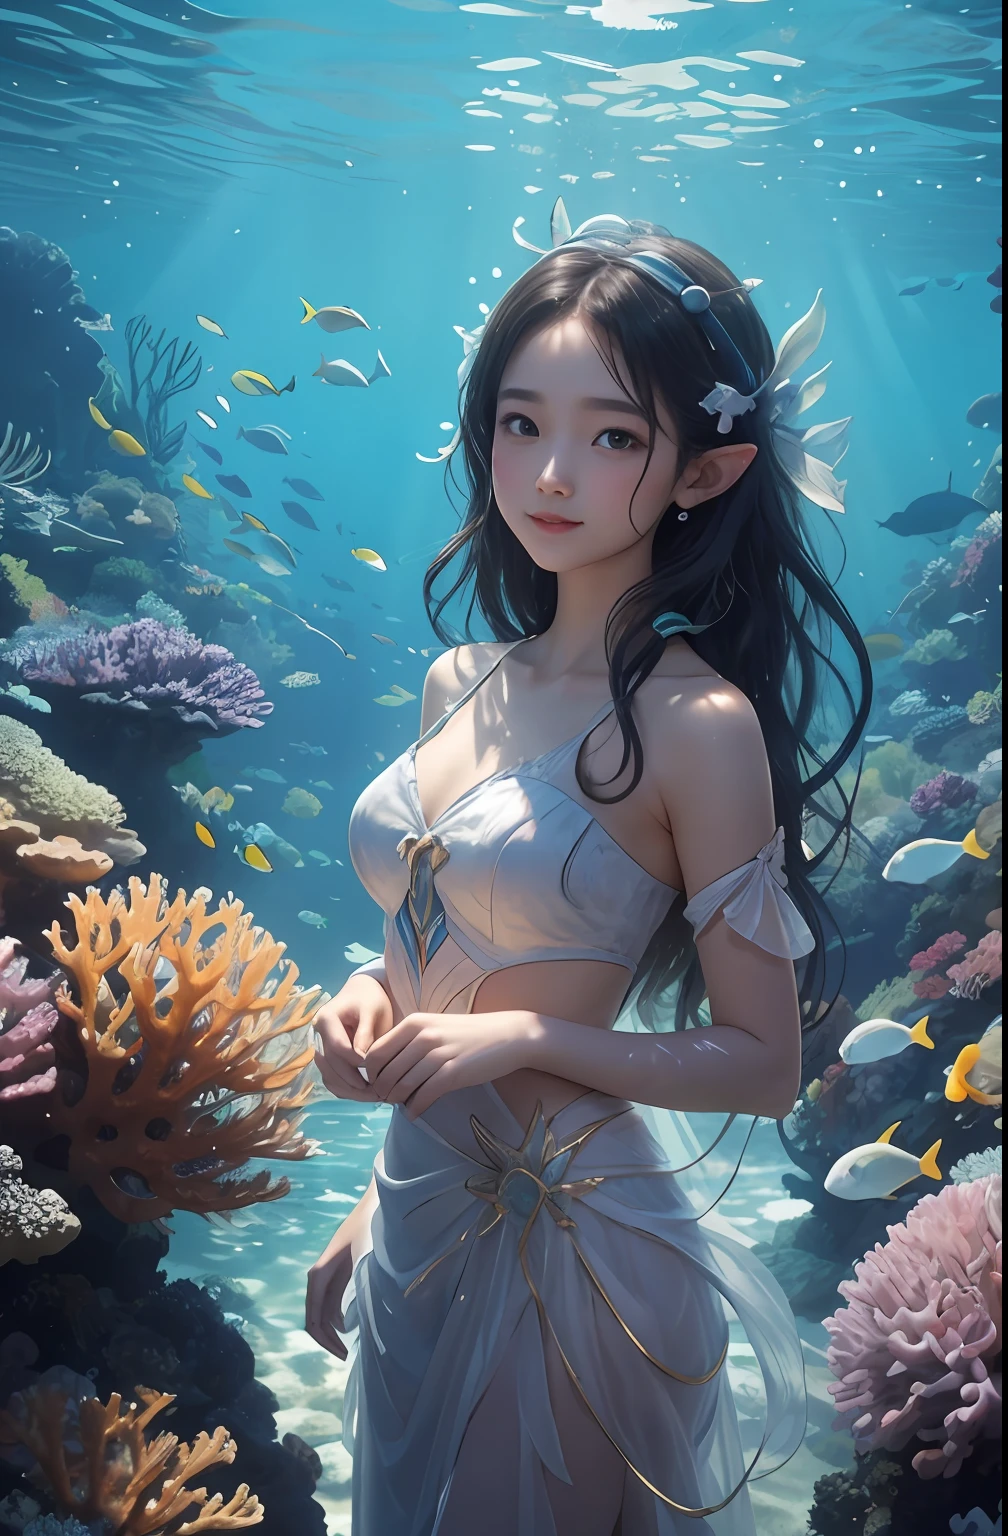 In the depths of the ocean，There is a beautiful girl，She is the elf of the sea，Accompany colorful fish and gorgeous coral reefs。

Her long hair was as thick as kelp，Soft and shiny，Flowing in water，Like a flowing ribbon。Every strand of hair shimmers with golden light，Like sunlight jumping in the sea，Exudes a unique sheen。Her eyes were like two deep pearls，The black pupils shone with a mysterious light，It is as if you can see through the depths of the ocean。

Her figure is light and elegant，Wearing a skirt woven from shells and conch，Like a princess under the sea。Her skin is as tender as fresh fi is brightened by the slight sunlight in the water。

The coral reefs around her are like a rainbow，Red、Orange、Yellow、The purple，Colorful，Shapes vary。They are gems in the ocean，Add endless color to this underwater world。A variety of marine life are attached to the coral reef，There are strangely shaped starfish，There are colorful small fish，There are also transparent jellyfish，They swim freely in the water，Bring life to the underwater world。

When the girl swims in the water，Her long hair fluttered behind her，With those colorful fish，A messy picture was formed。This messy beauty，yet harmonious and natural，Let people marvel at the magic and beauty of nature。Her hair is like silk in water，Flows through the water as she swims，Blend in with the surrounding aquatic creatures，It creates a mysterious and harmonious atmosphere。
Every time she smiled，It's like a ray of light in the ocean，Warm and brilliant。She dances freely in the underwater world，Together with the beautiful coral reefs and fish, it forms a beautiful picture，Let people marvel at the mystery and beauty of the ocean。Detailed screen，{best qualtiy}， {{tmasterpiece}}， {A high resolution}， Original， Extremely detailed 8k wallpaper， {Extremely refined and beautiful}，（tmasterpiece） ， （best qualtiy） ， （Realistis： 1.3） ， realisticlying， rendering by octane， （hyper realisitc： 1.2） ， Perfect feature， Original， extremelydetailedwallpa